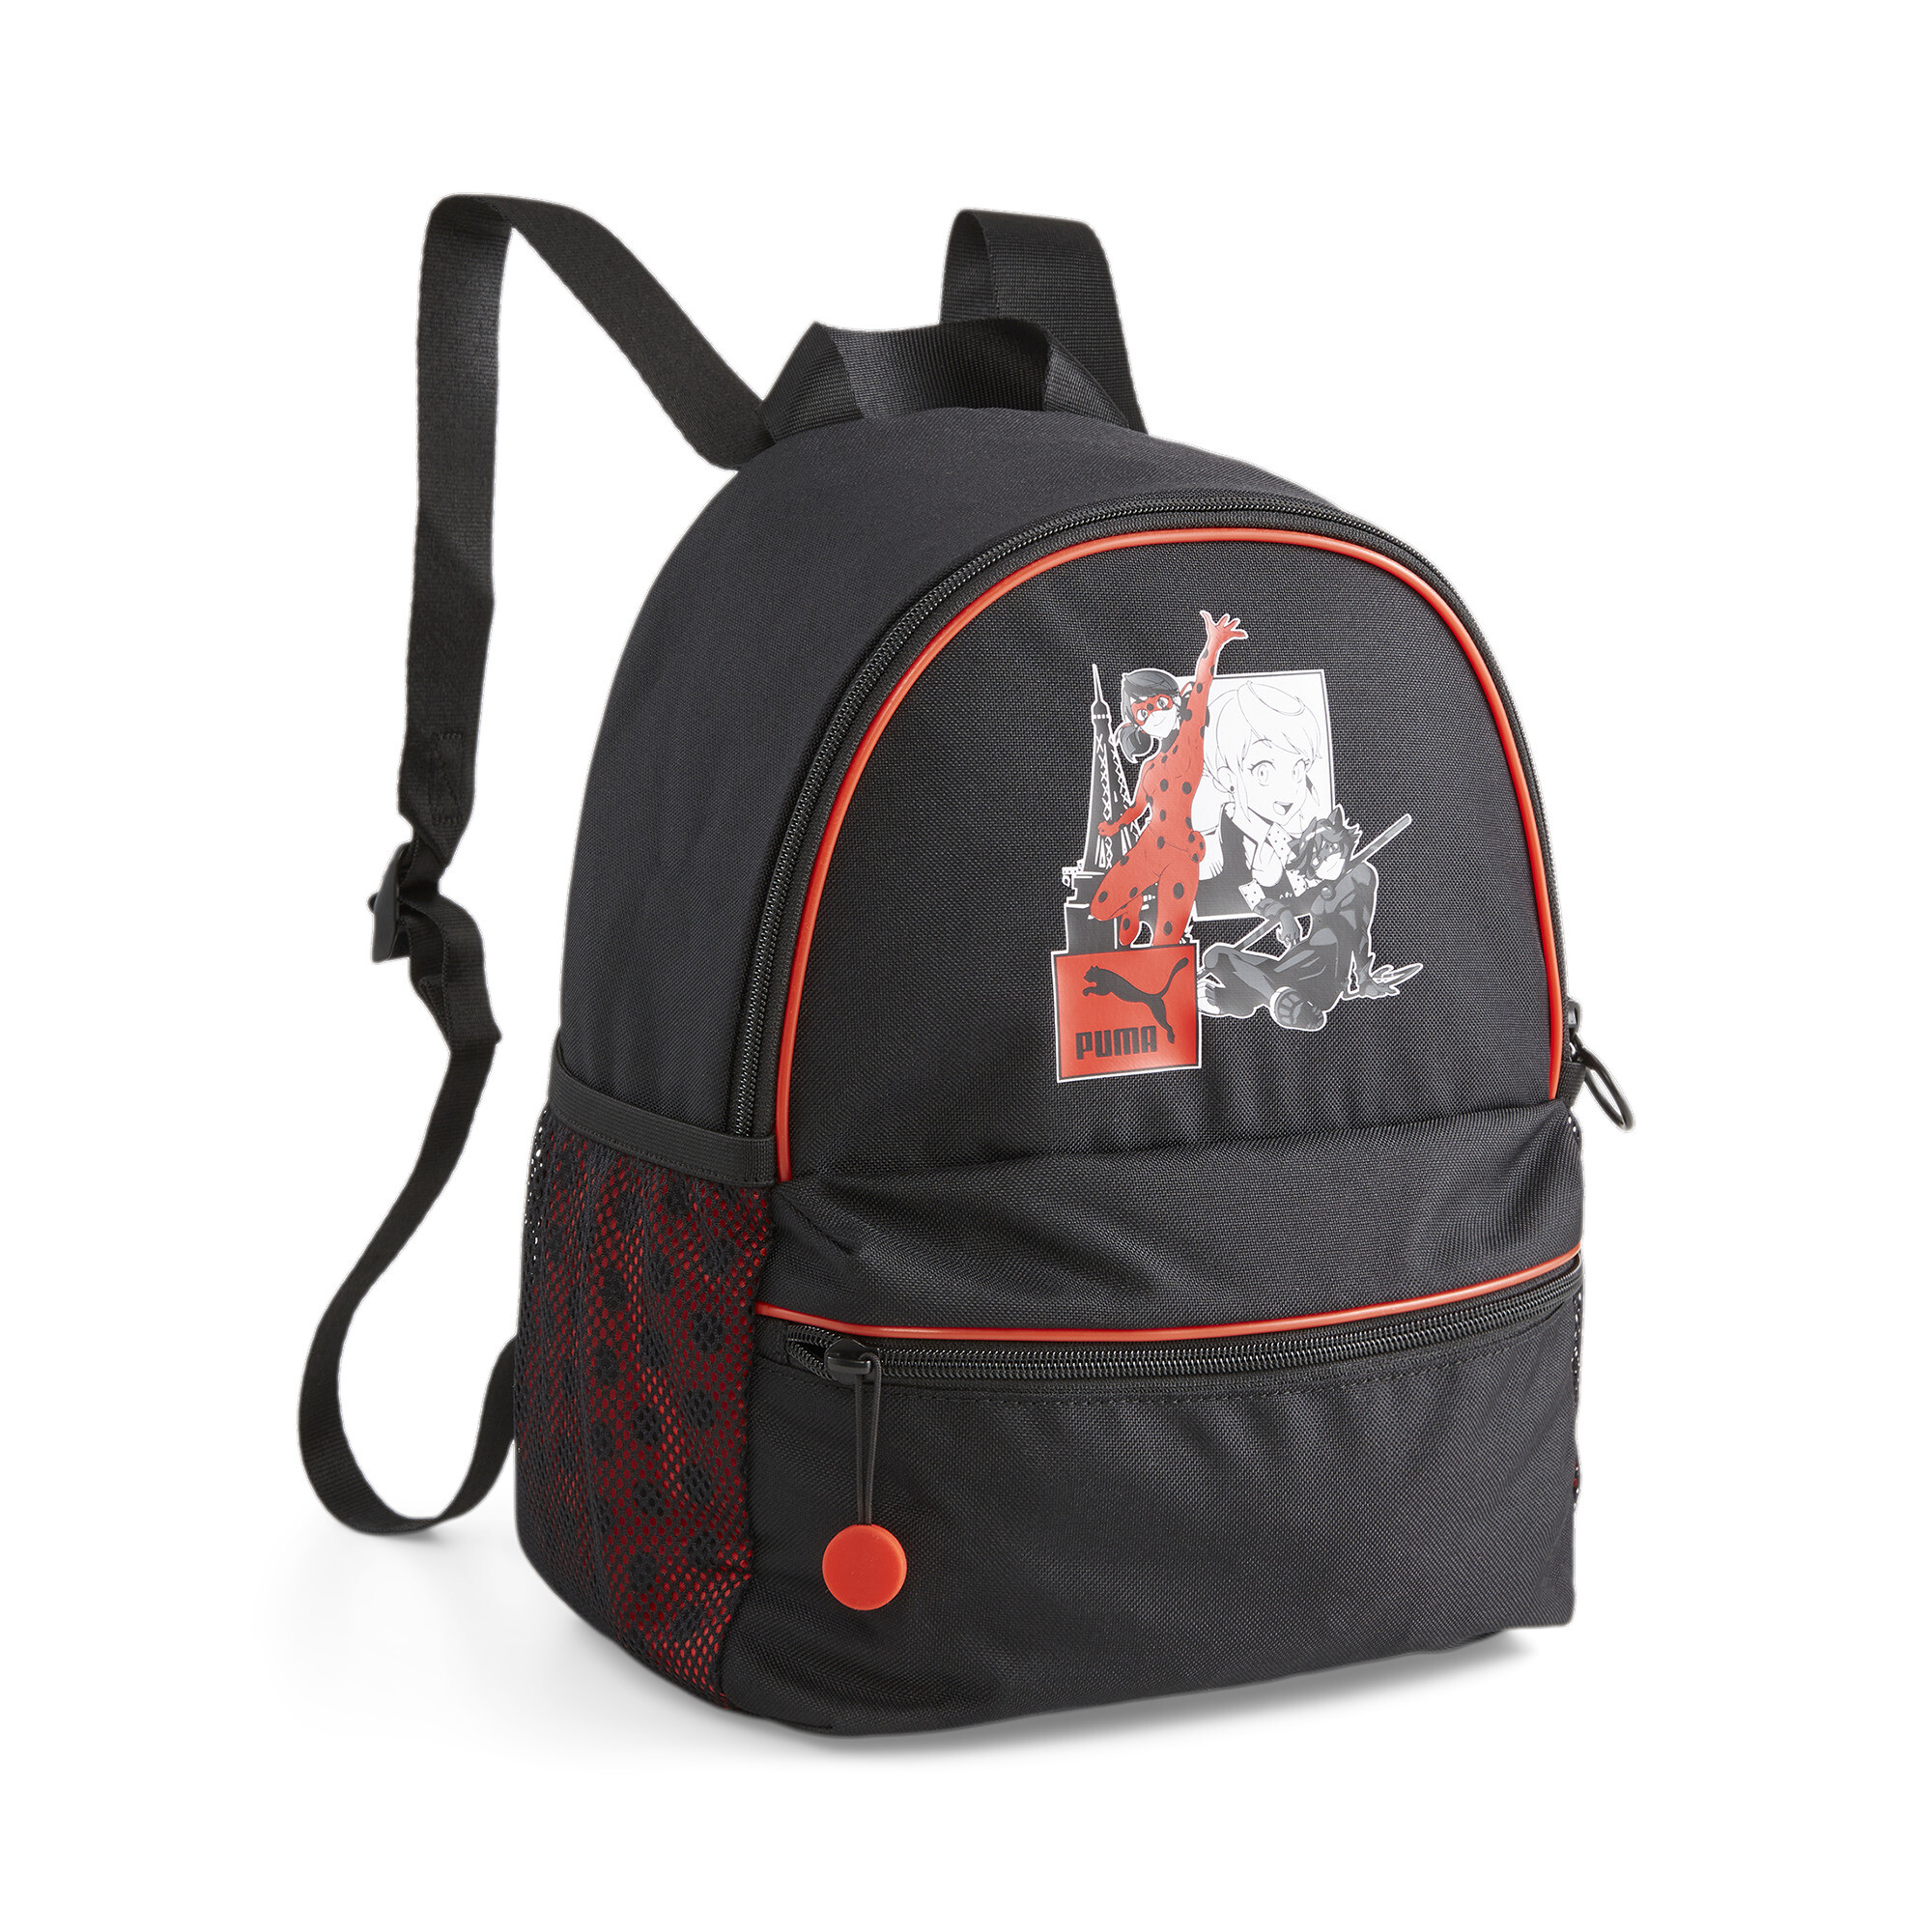 Puma X MIRACULOUS Youth Backpack, Black, Accessories